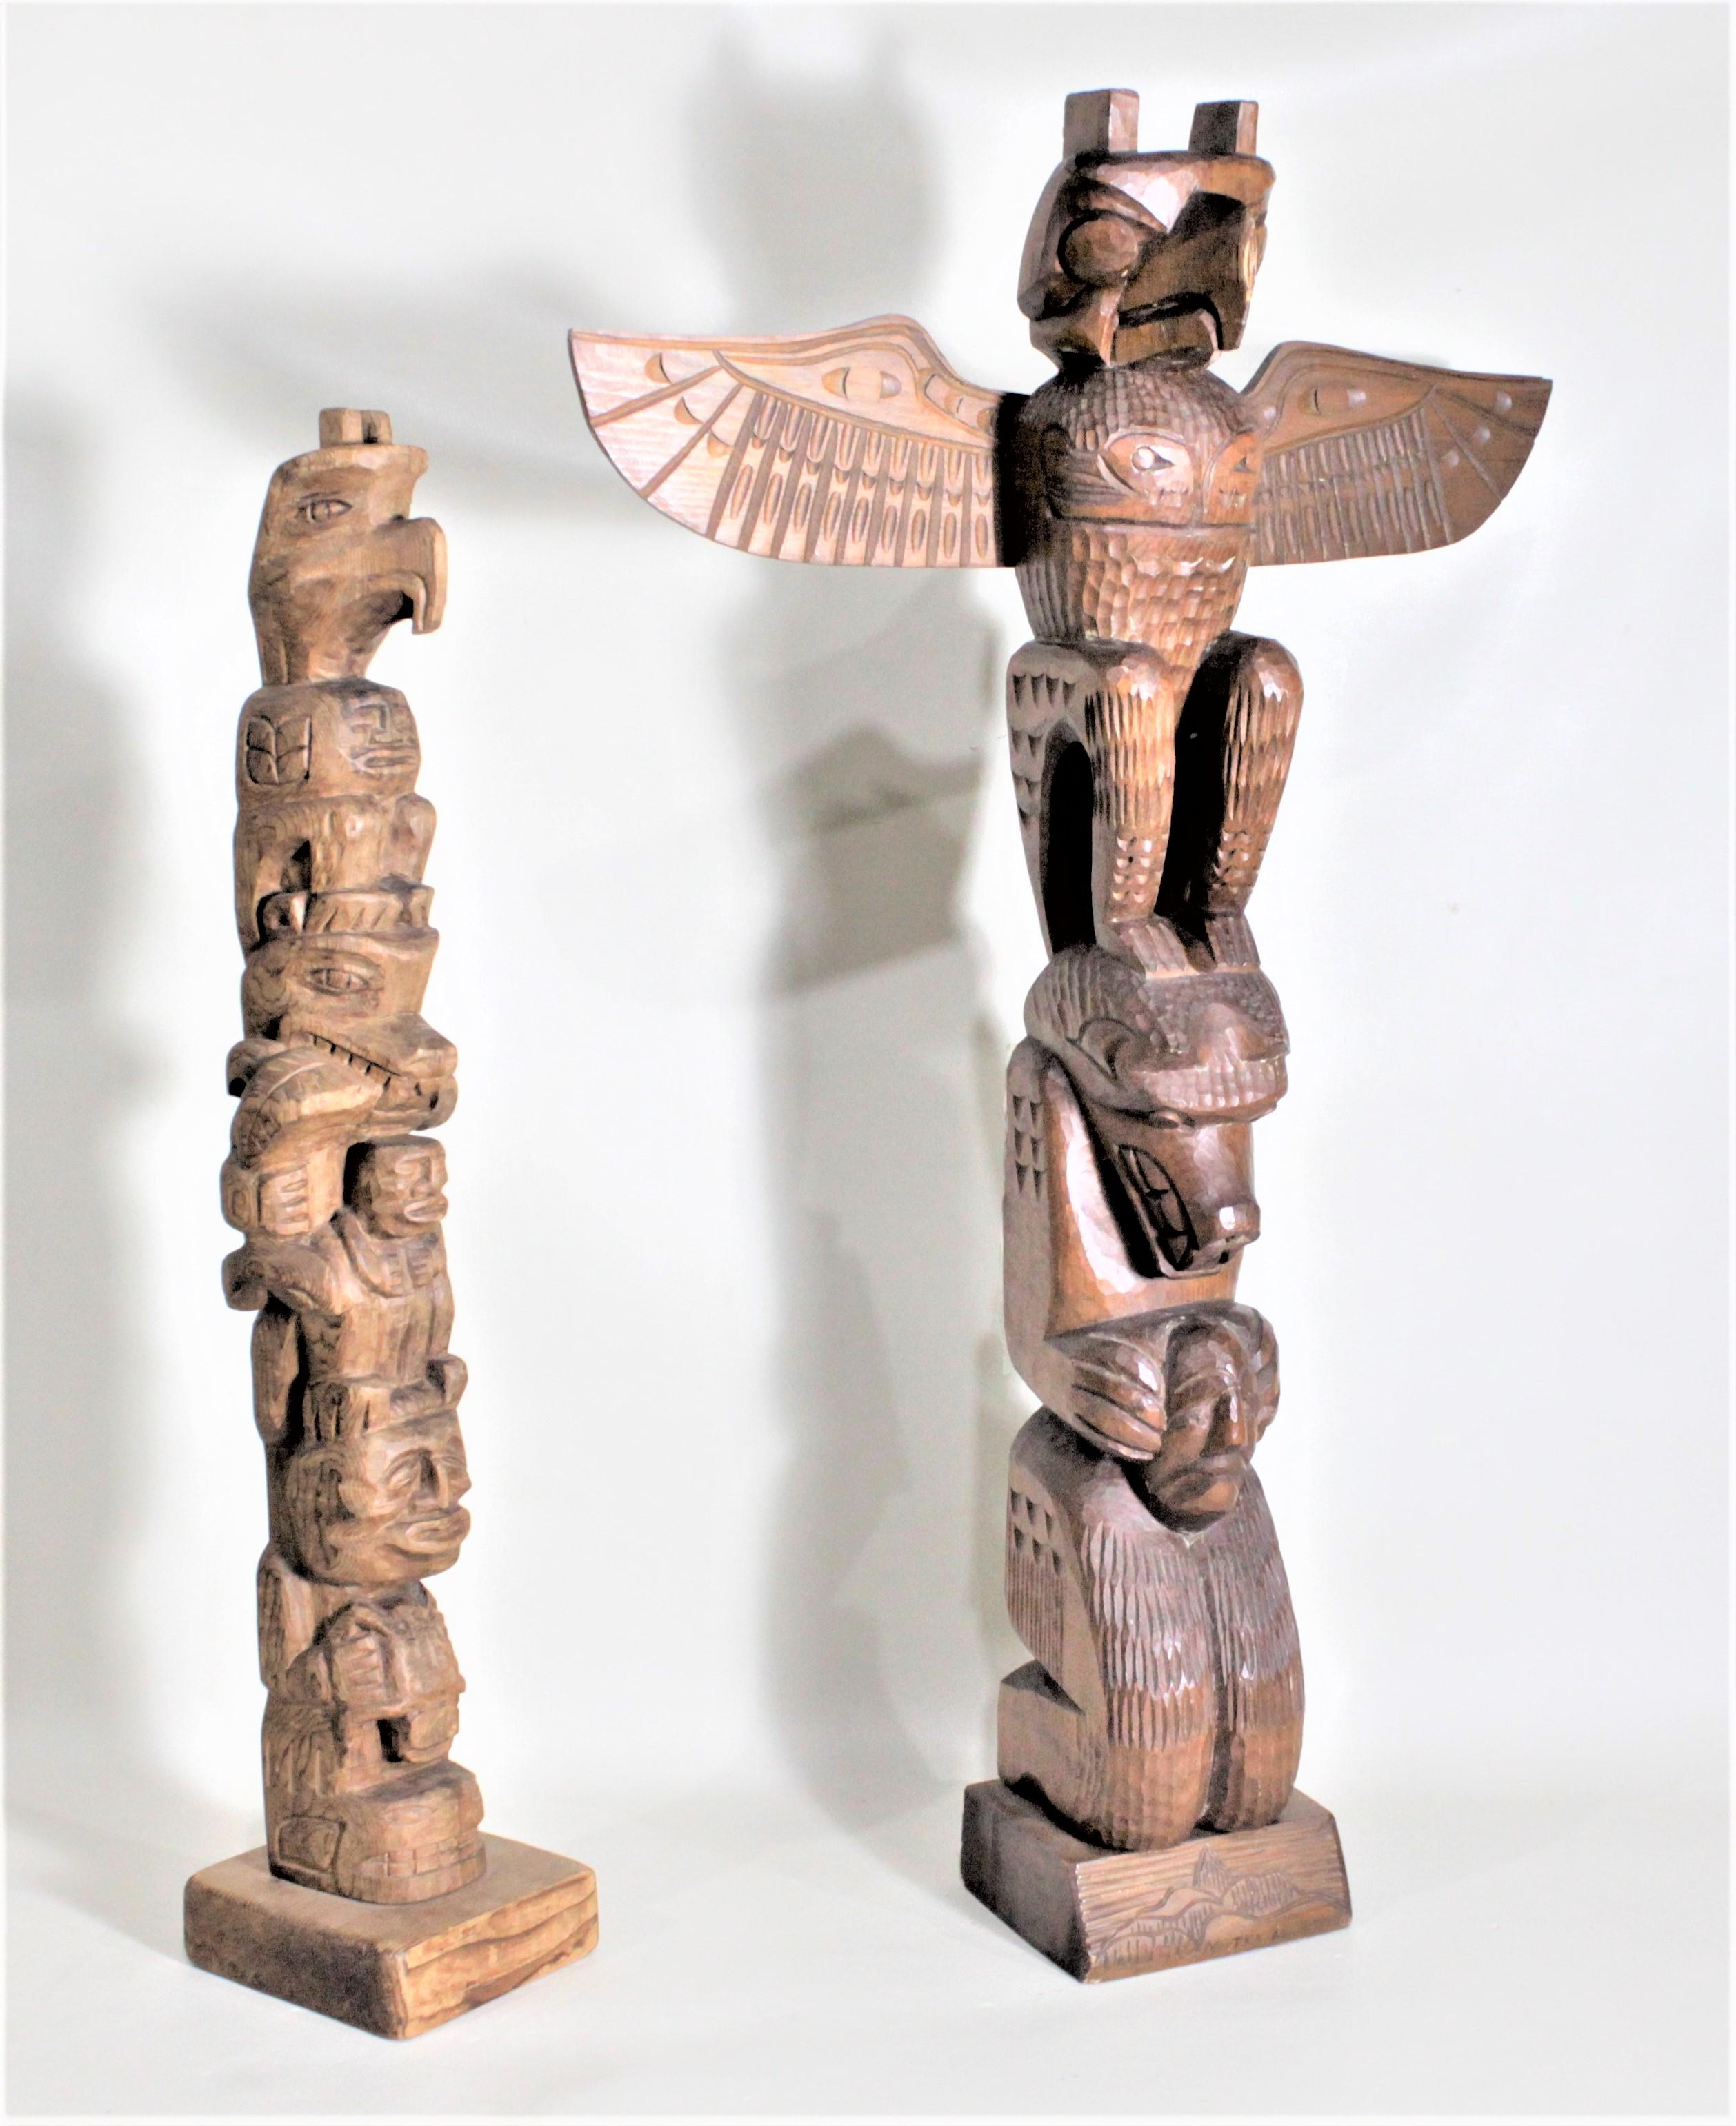 This pair of hand carved cedar TOTEM Poles were presumed to have been done in circa 1965 in the West Coast Canadian Indigenous Haida and Nootka styles respectively. The larger of the two TOTEM Poles has a label that identifies it as being carved by